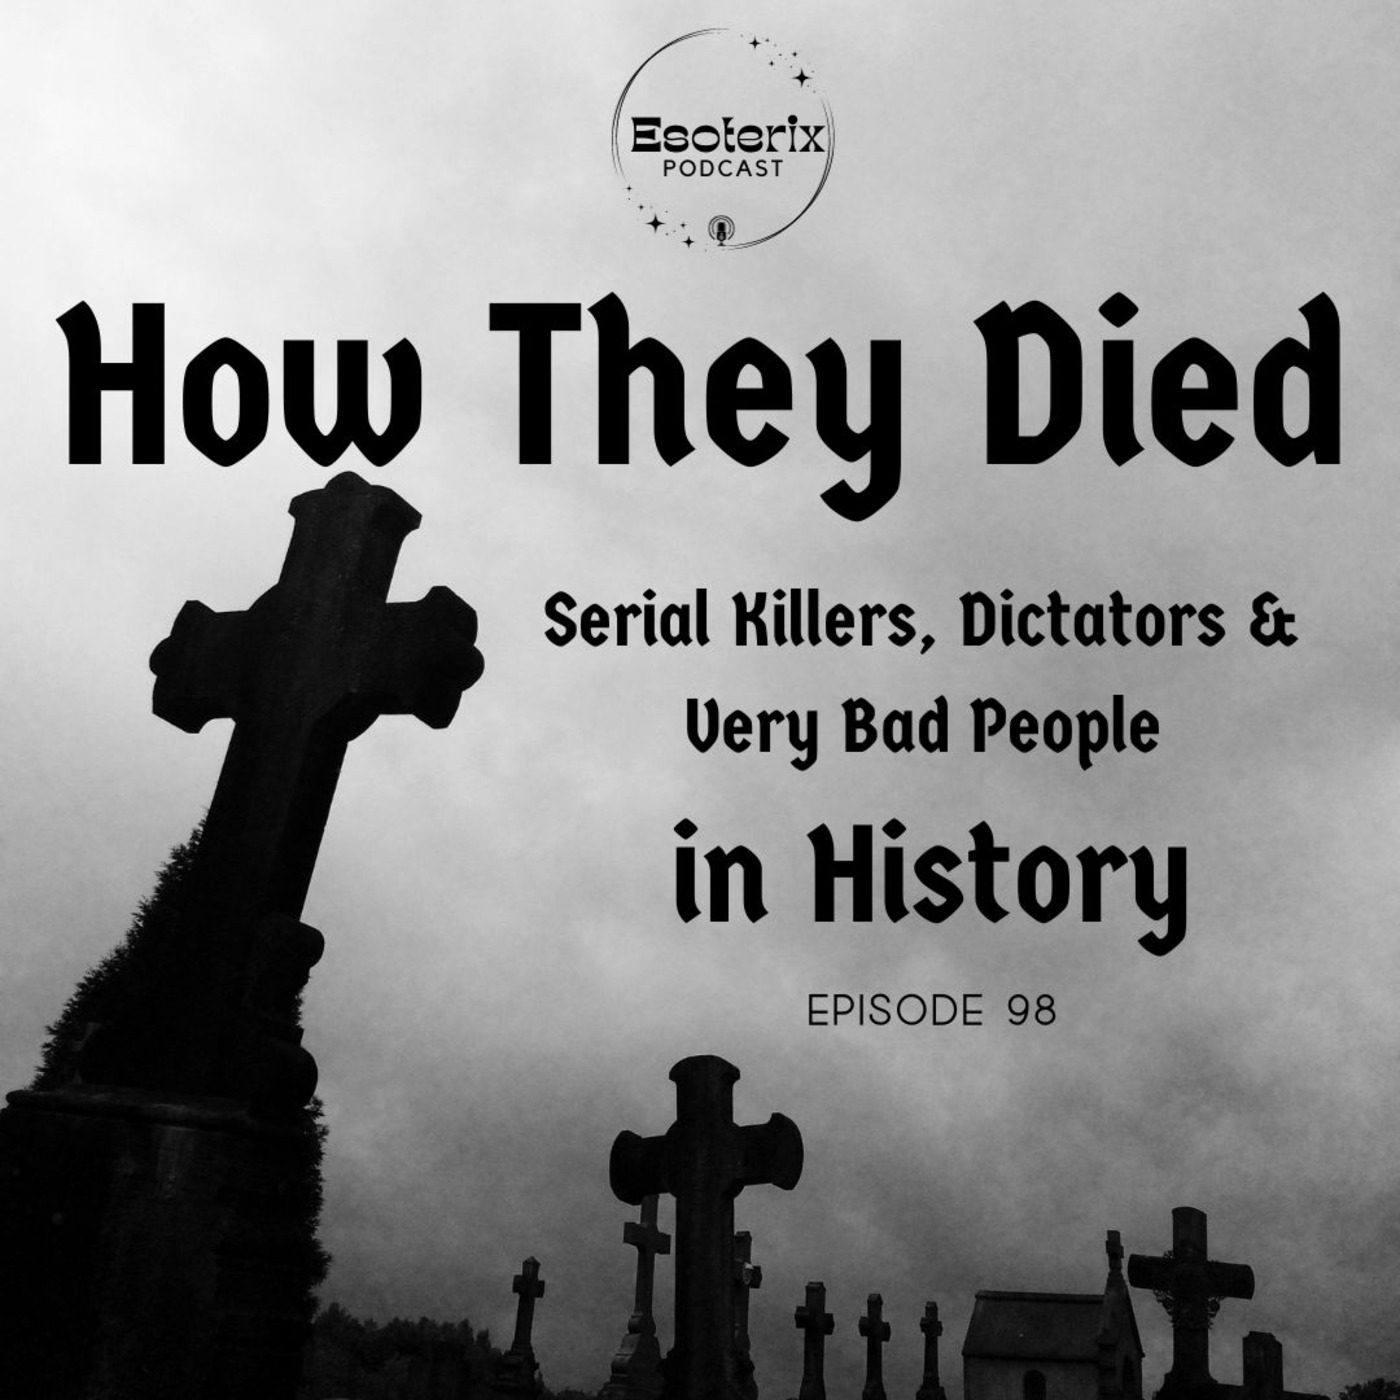 Episode 98: How They Died... Serial Killers, Dictators & Very Bad People  in History